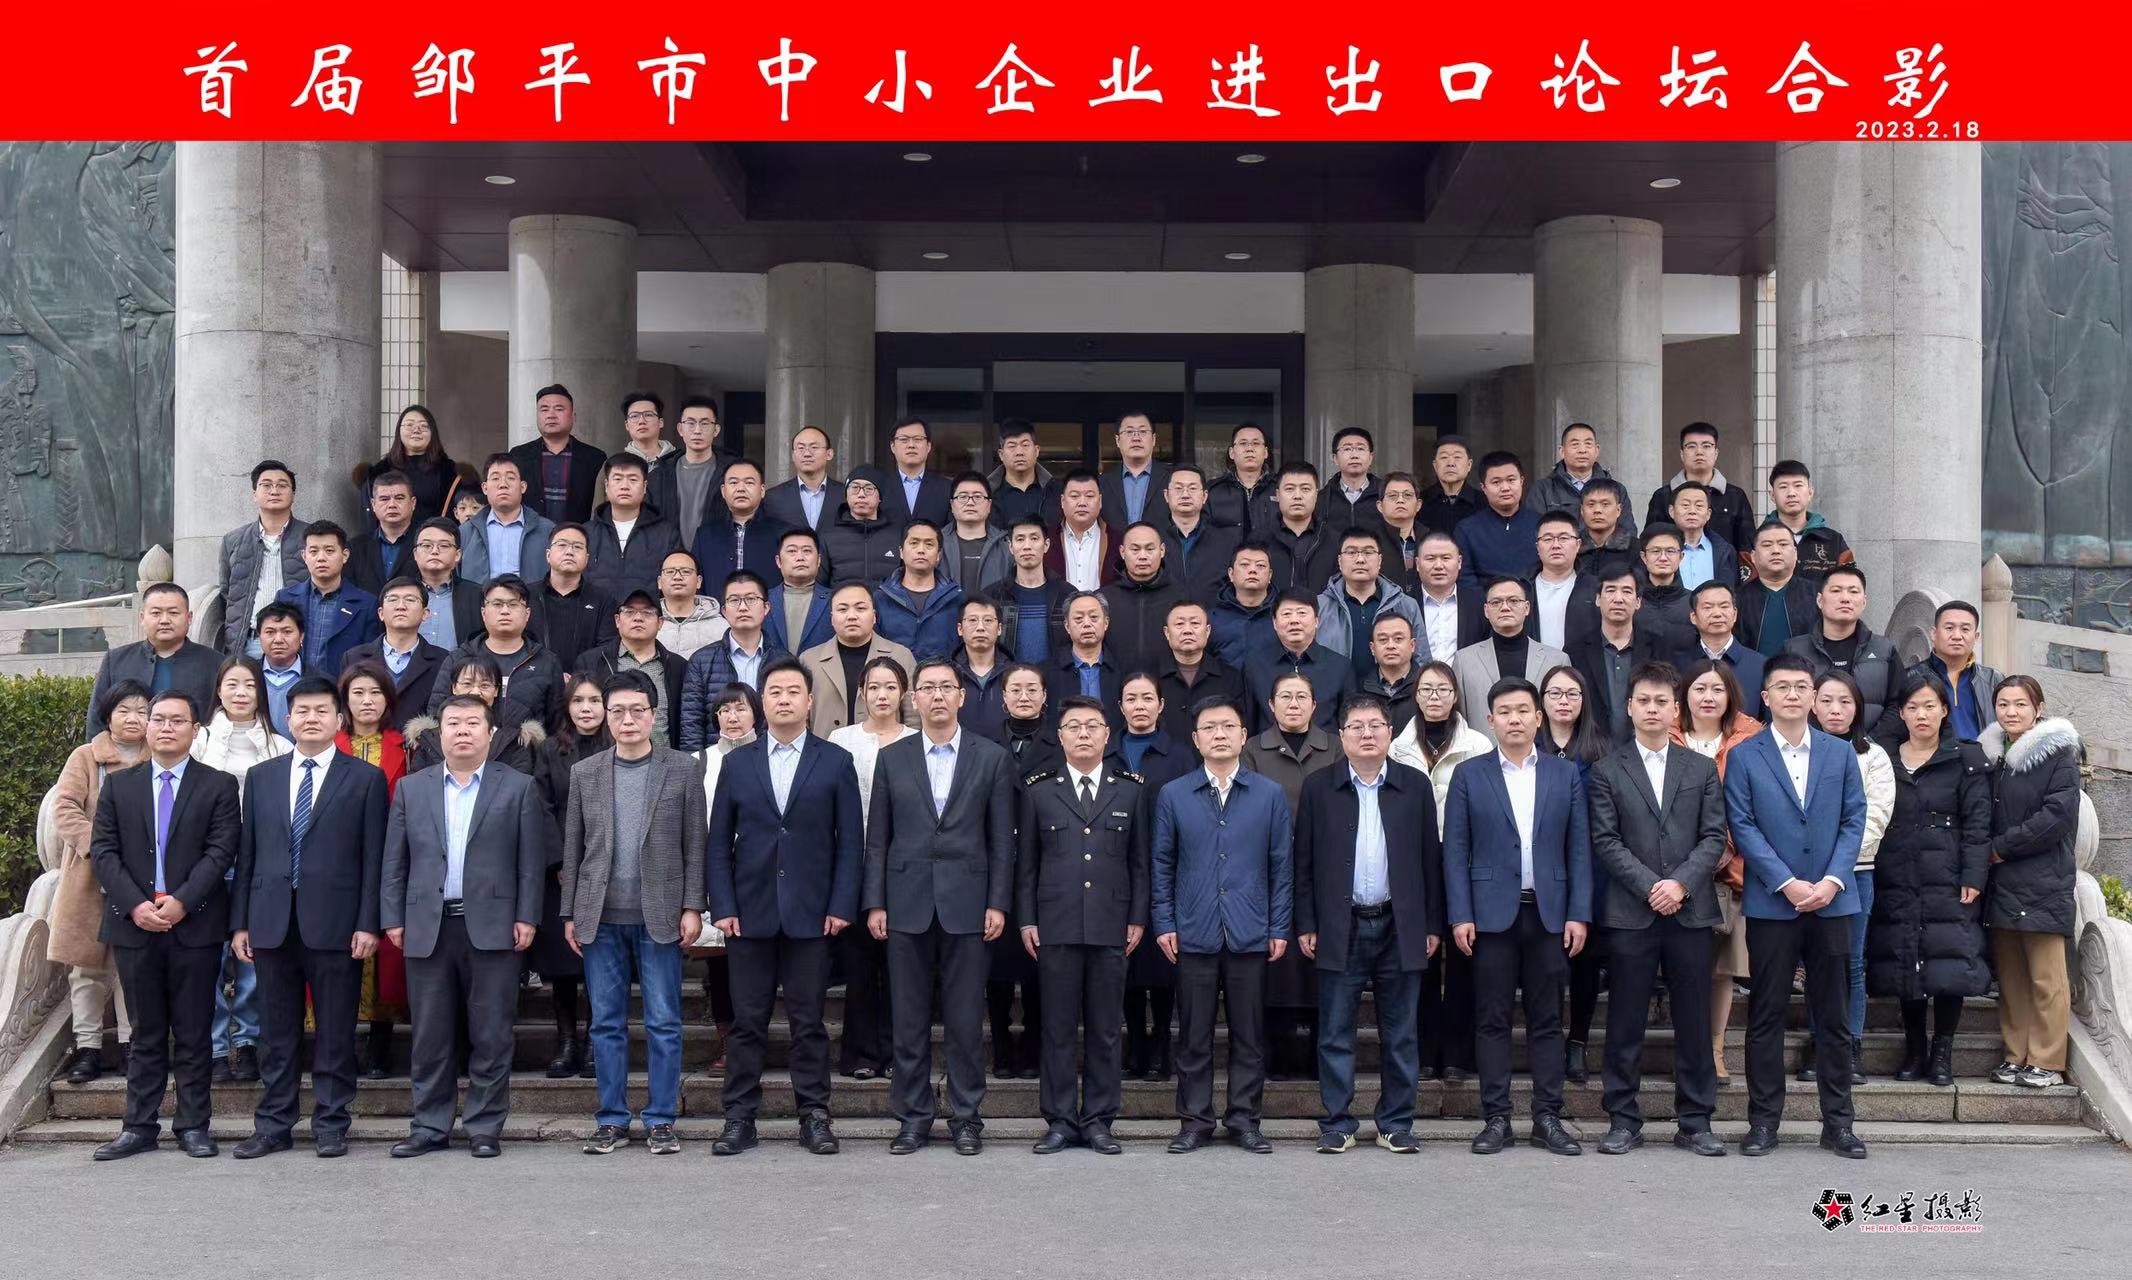 Attended The 1st Zouping Enterprise Forum in China